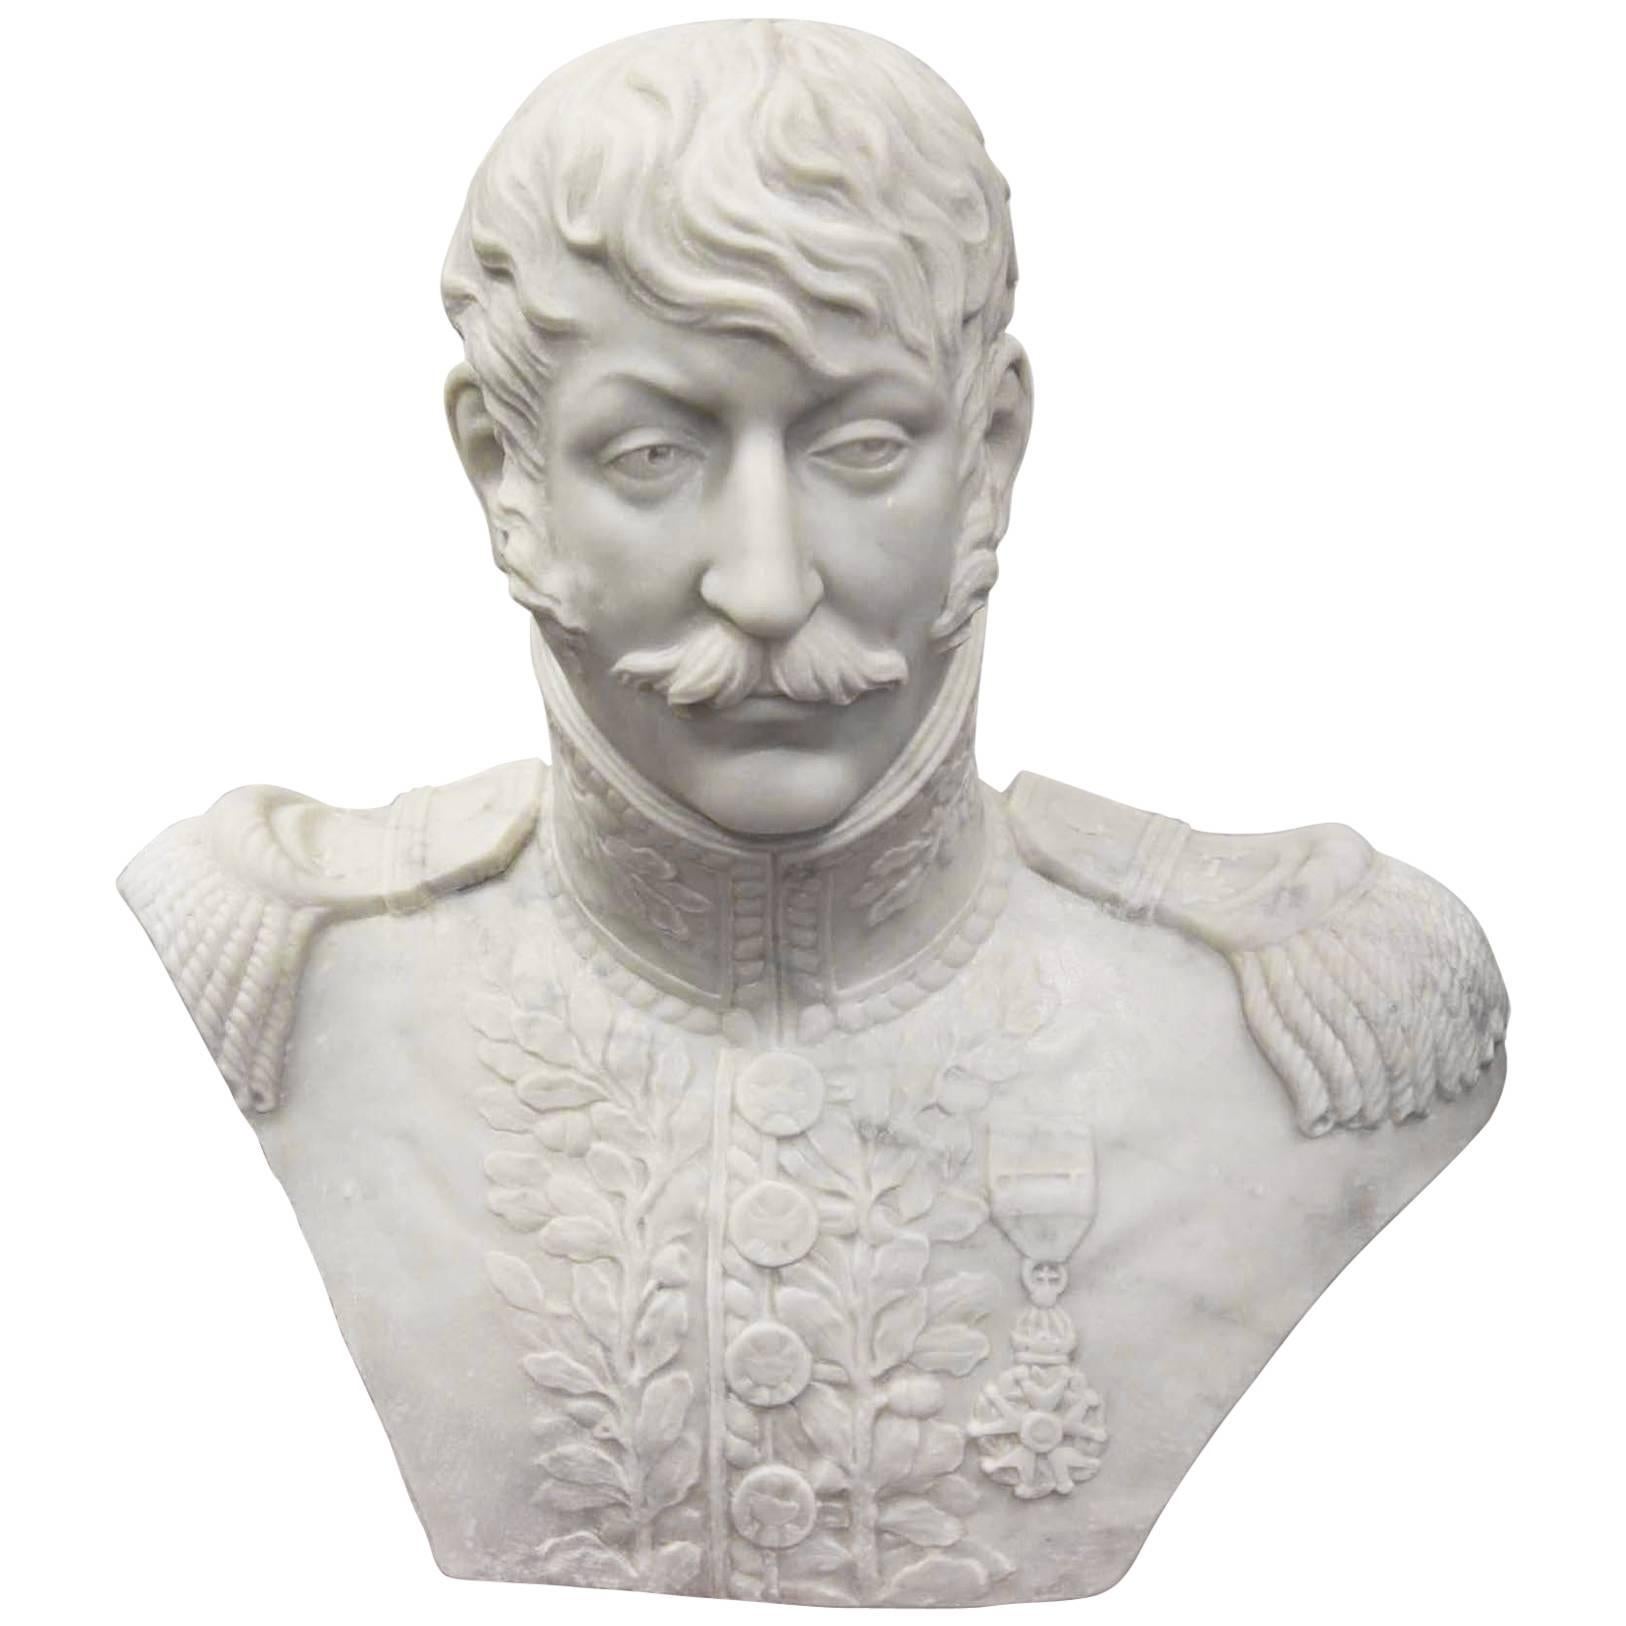 General of the Empire Marble Bust, Empire Period